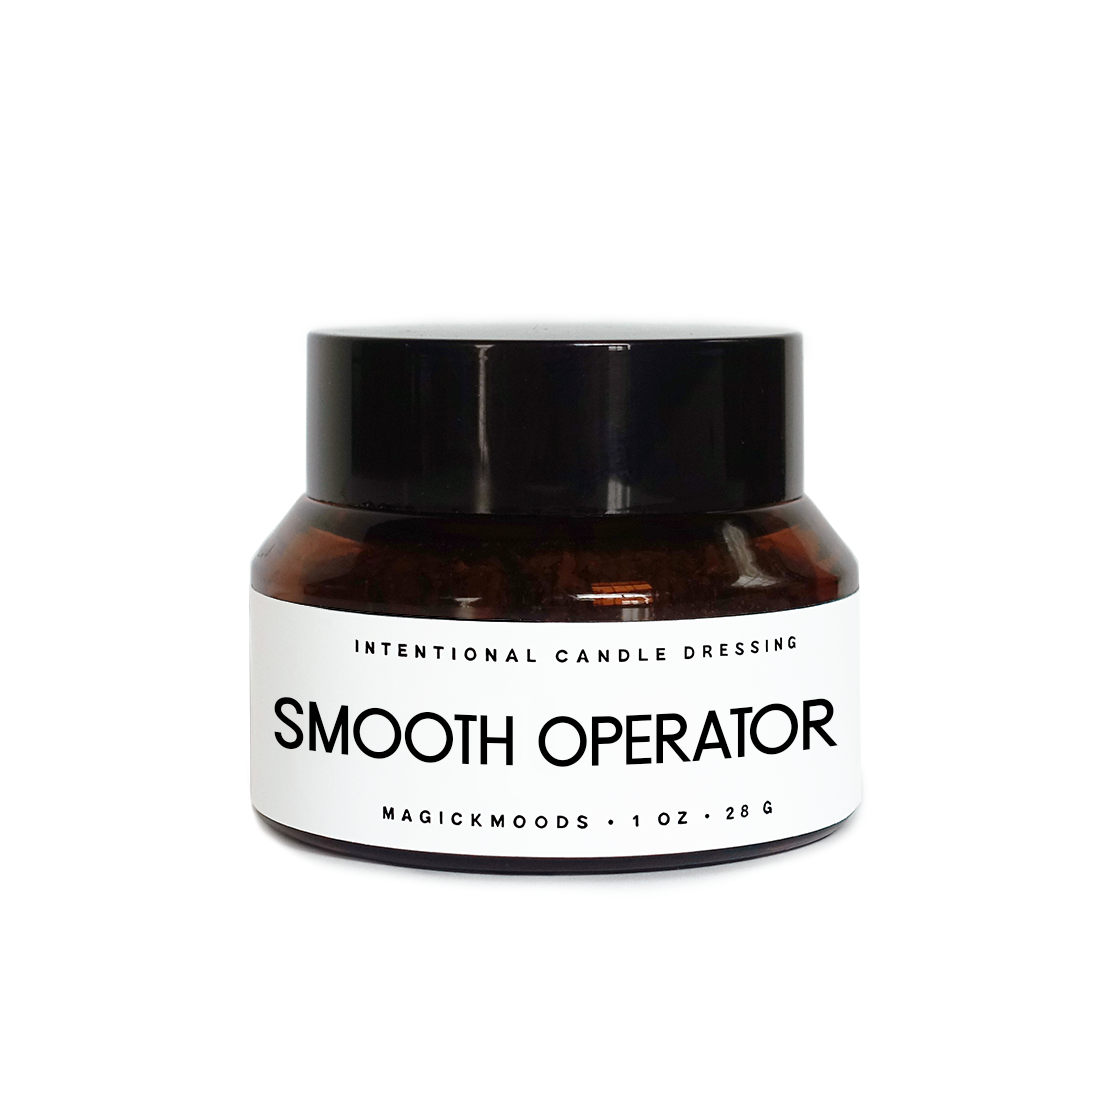 Smooth Operator Candle Dressing